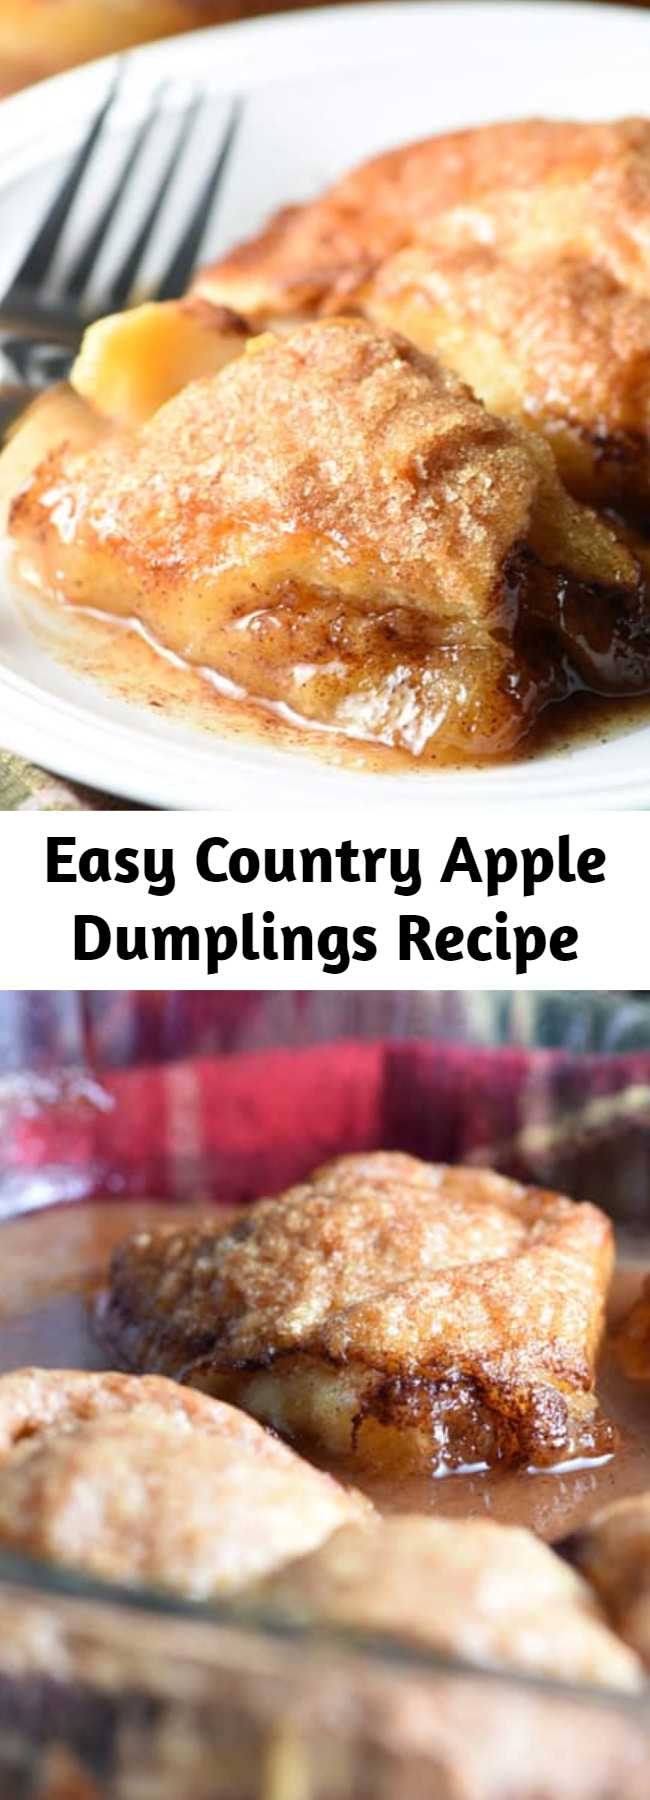 Easy Country Apple Dumplings Recipe - These Easy Country Apple Dumplings are soft and gooey on the bottom, but crispy on top, and they taste like apple pie. So easy and ridiculously good. Plus the house smells amazing while they bake!